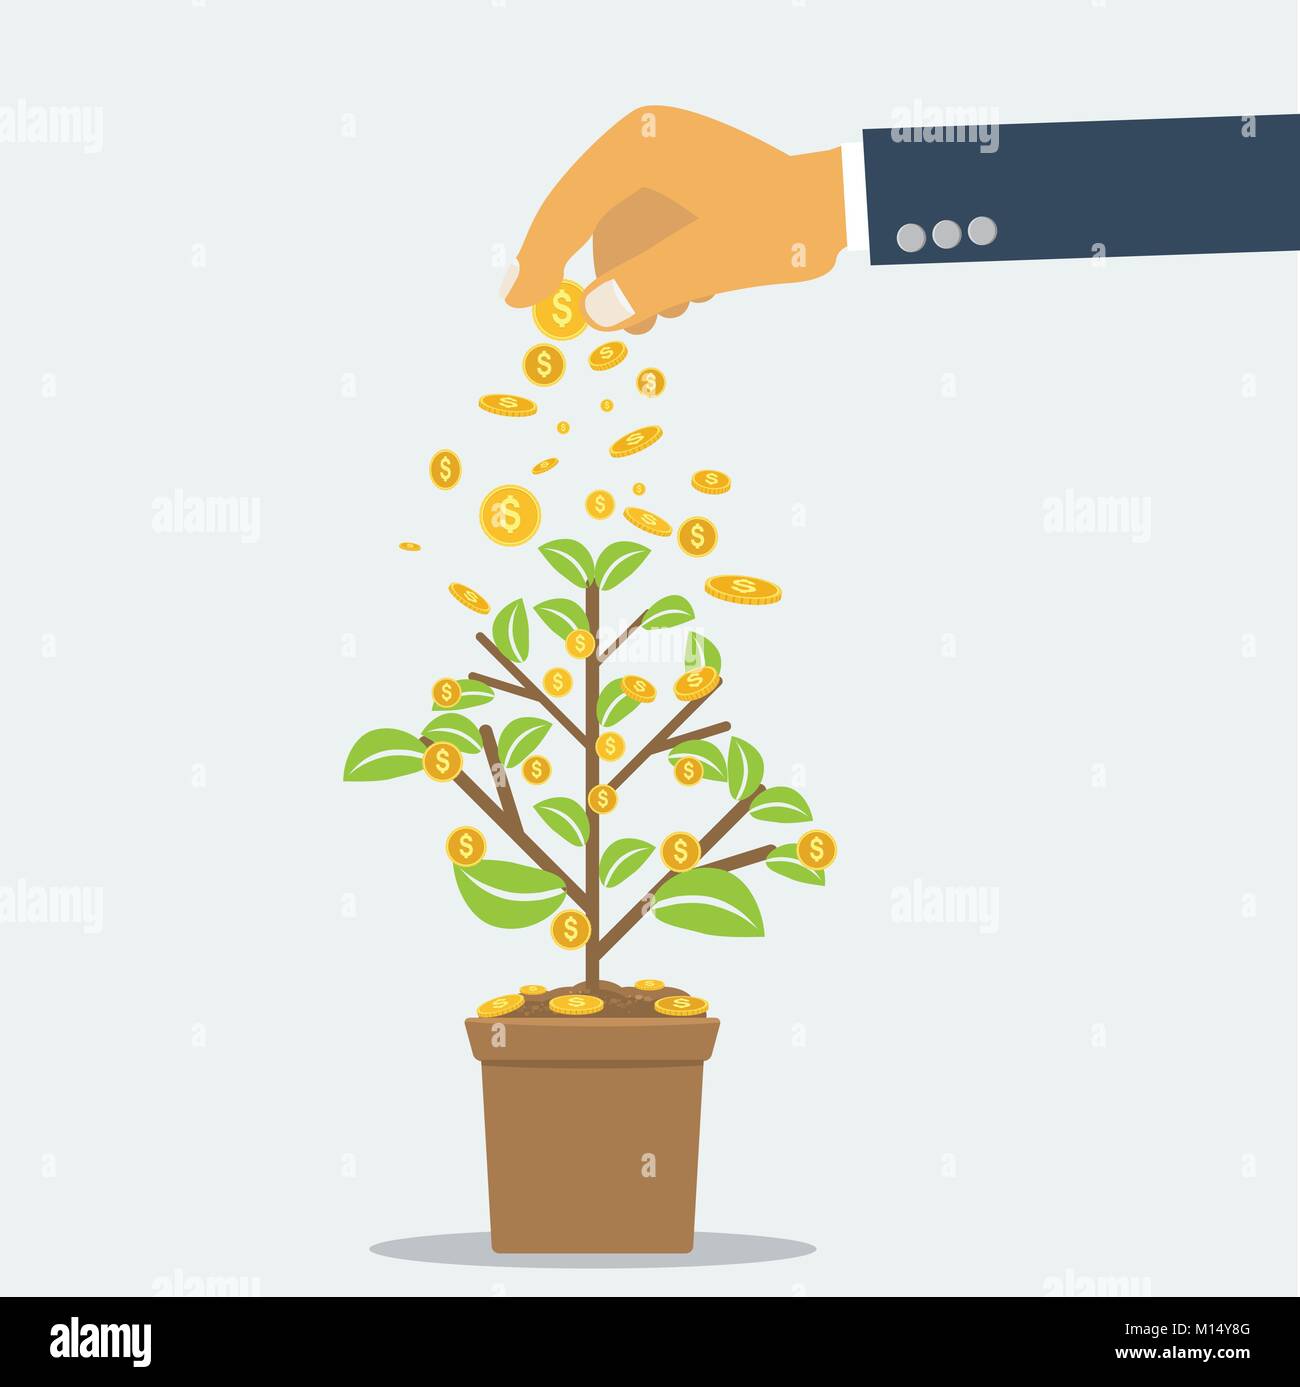 Businessman hand investing money coin tree with can. growth, investment concept with flat and solid color style. Stock Vector